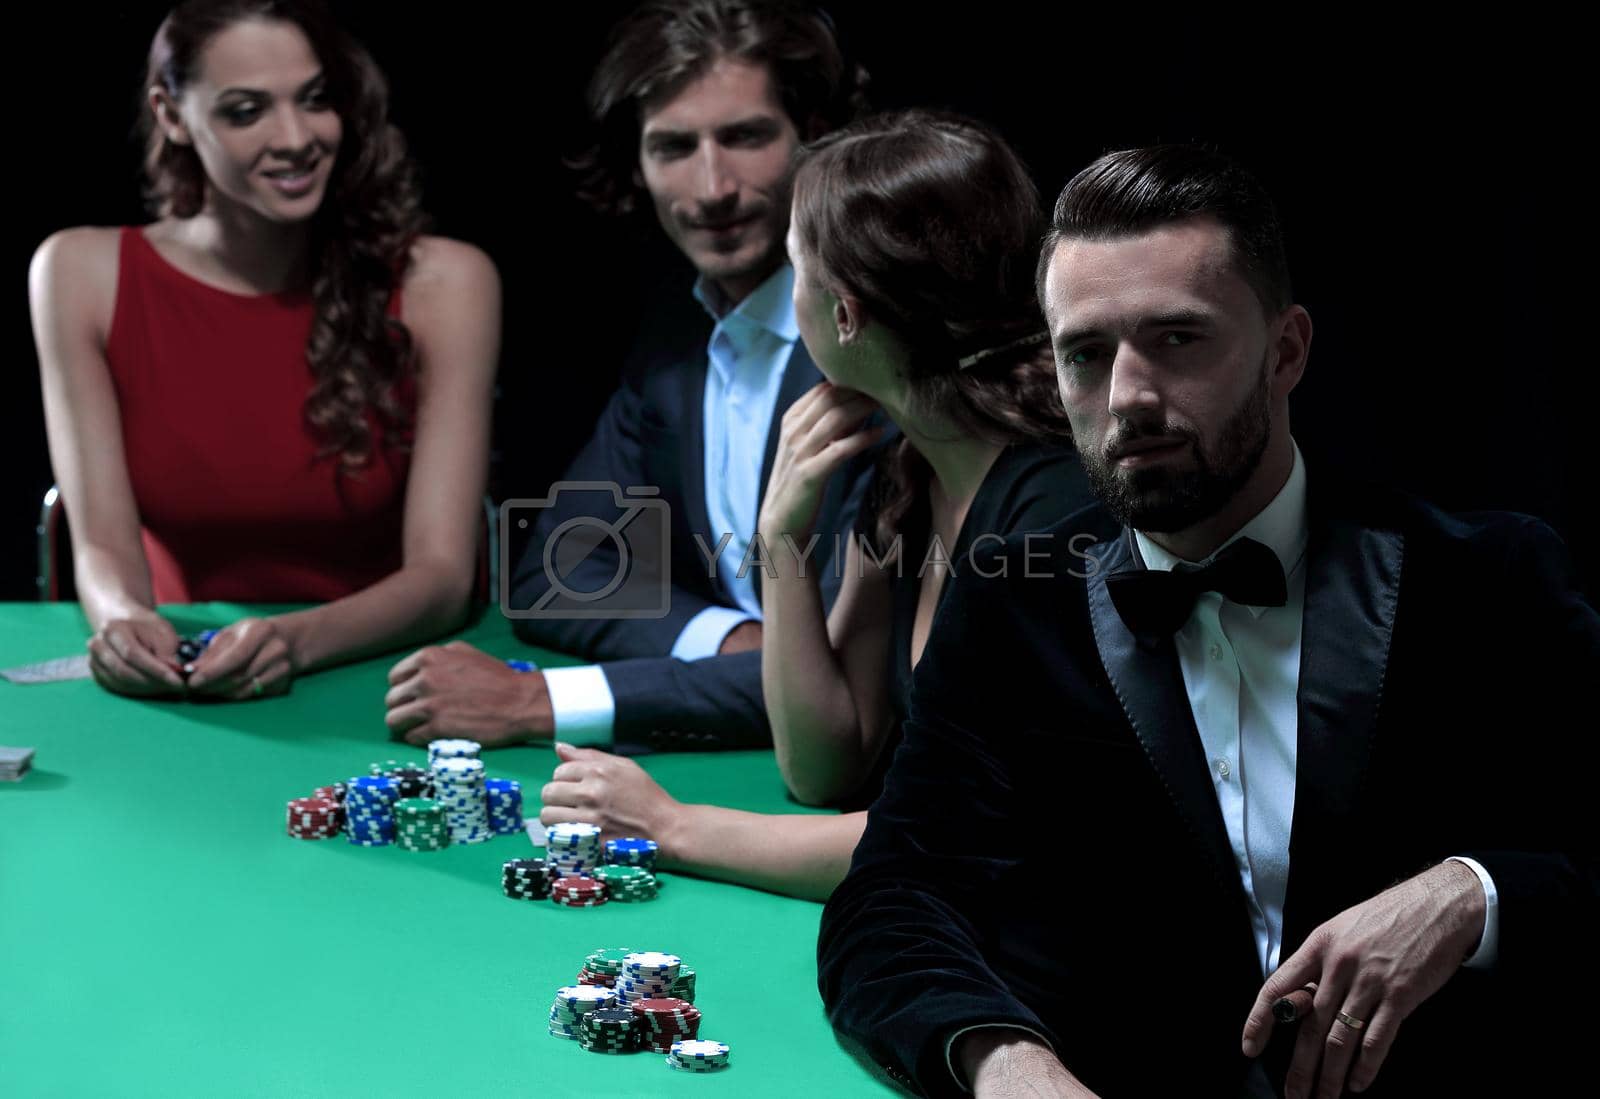 Royalty free image of Man with cigar looking up from poker game in casino by asdf